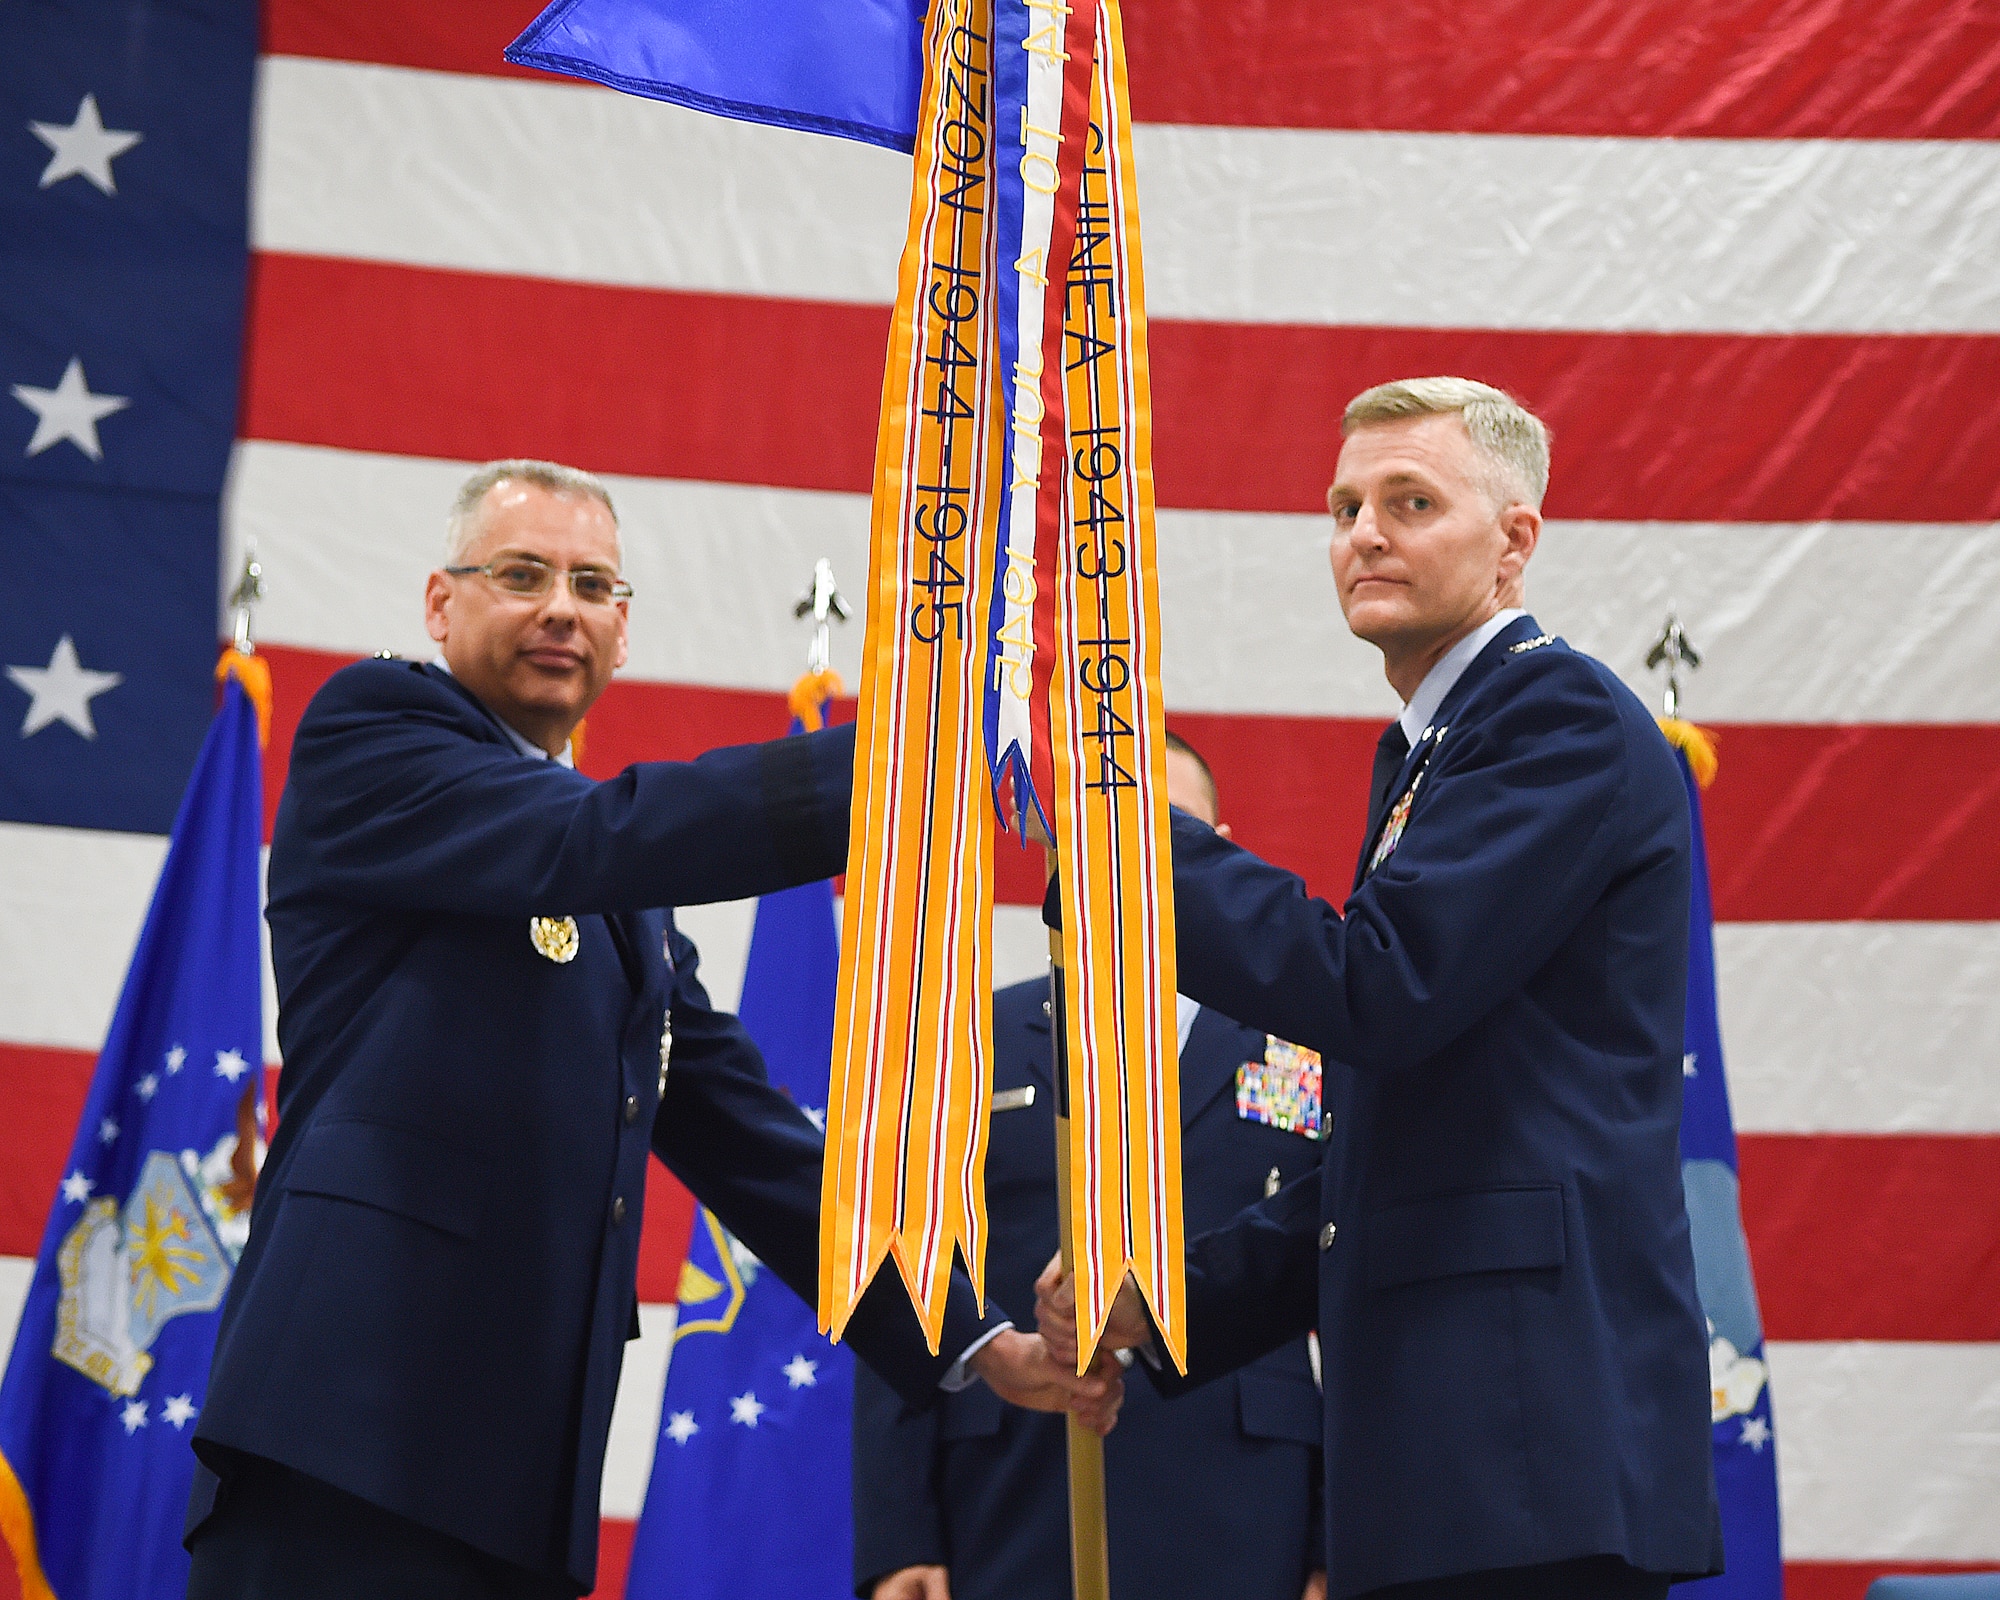 Maj. Gen. Jack Weinstein, Task Force 214 and 20th Air Force commander, presents the guidon of the 582nd Helicopter Group to Col. Dave Smith during the assumption of command ceremony March 27, 2015, on F.E. Warren Air Force Base, Wyo. The new group, comprised of the three helicopter squadrons under 20th AF and the newly established 582nd Operations Support Squadron, was formed to improve mission effectiveness and standardize helicopter operations throughout the 20th AF. (U.S. Air Force photo by R.J. Oriez/Released)